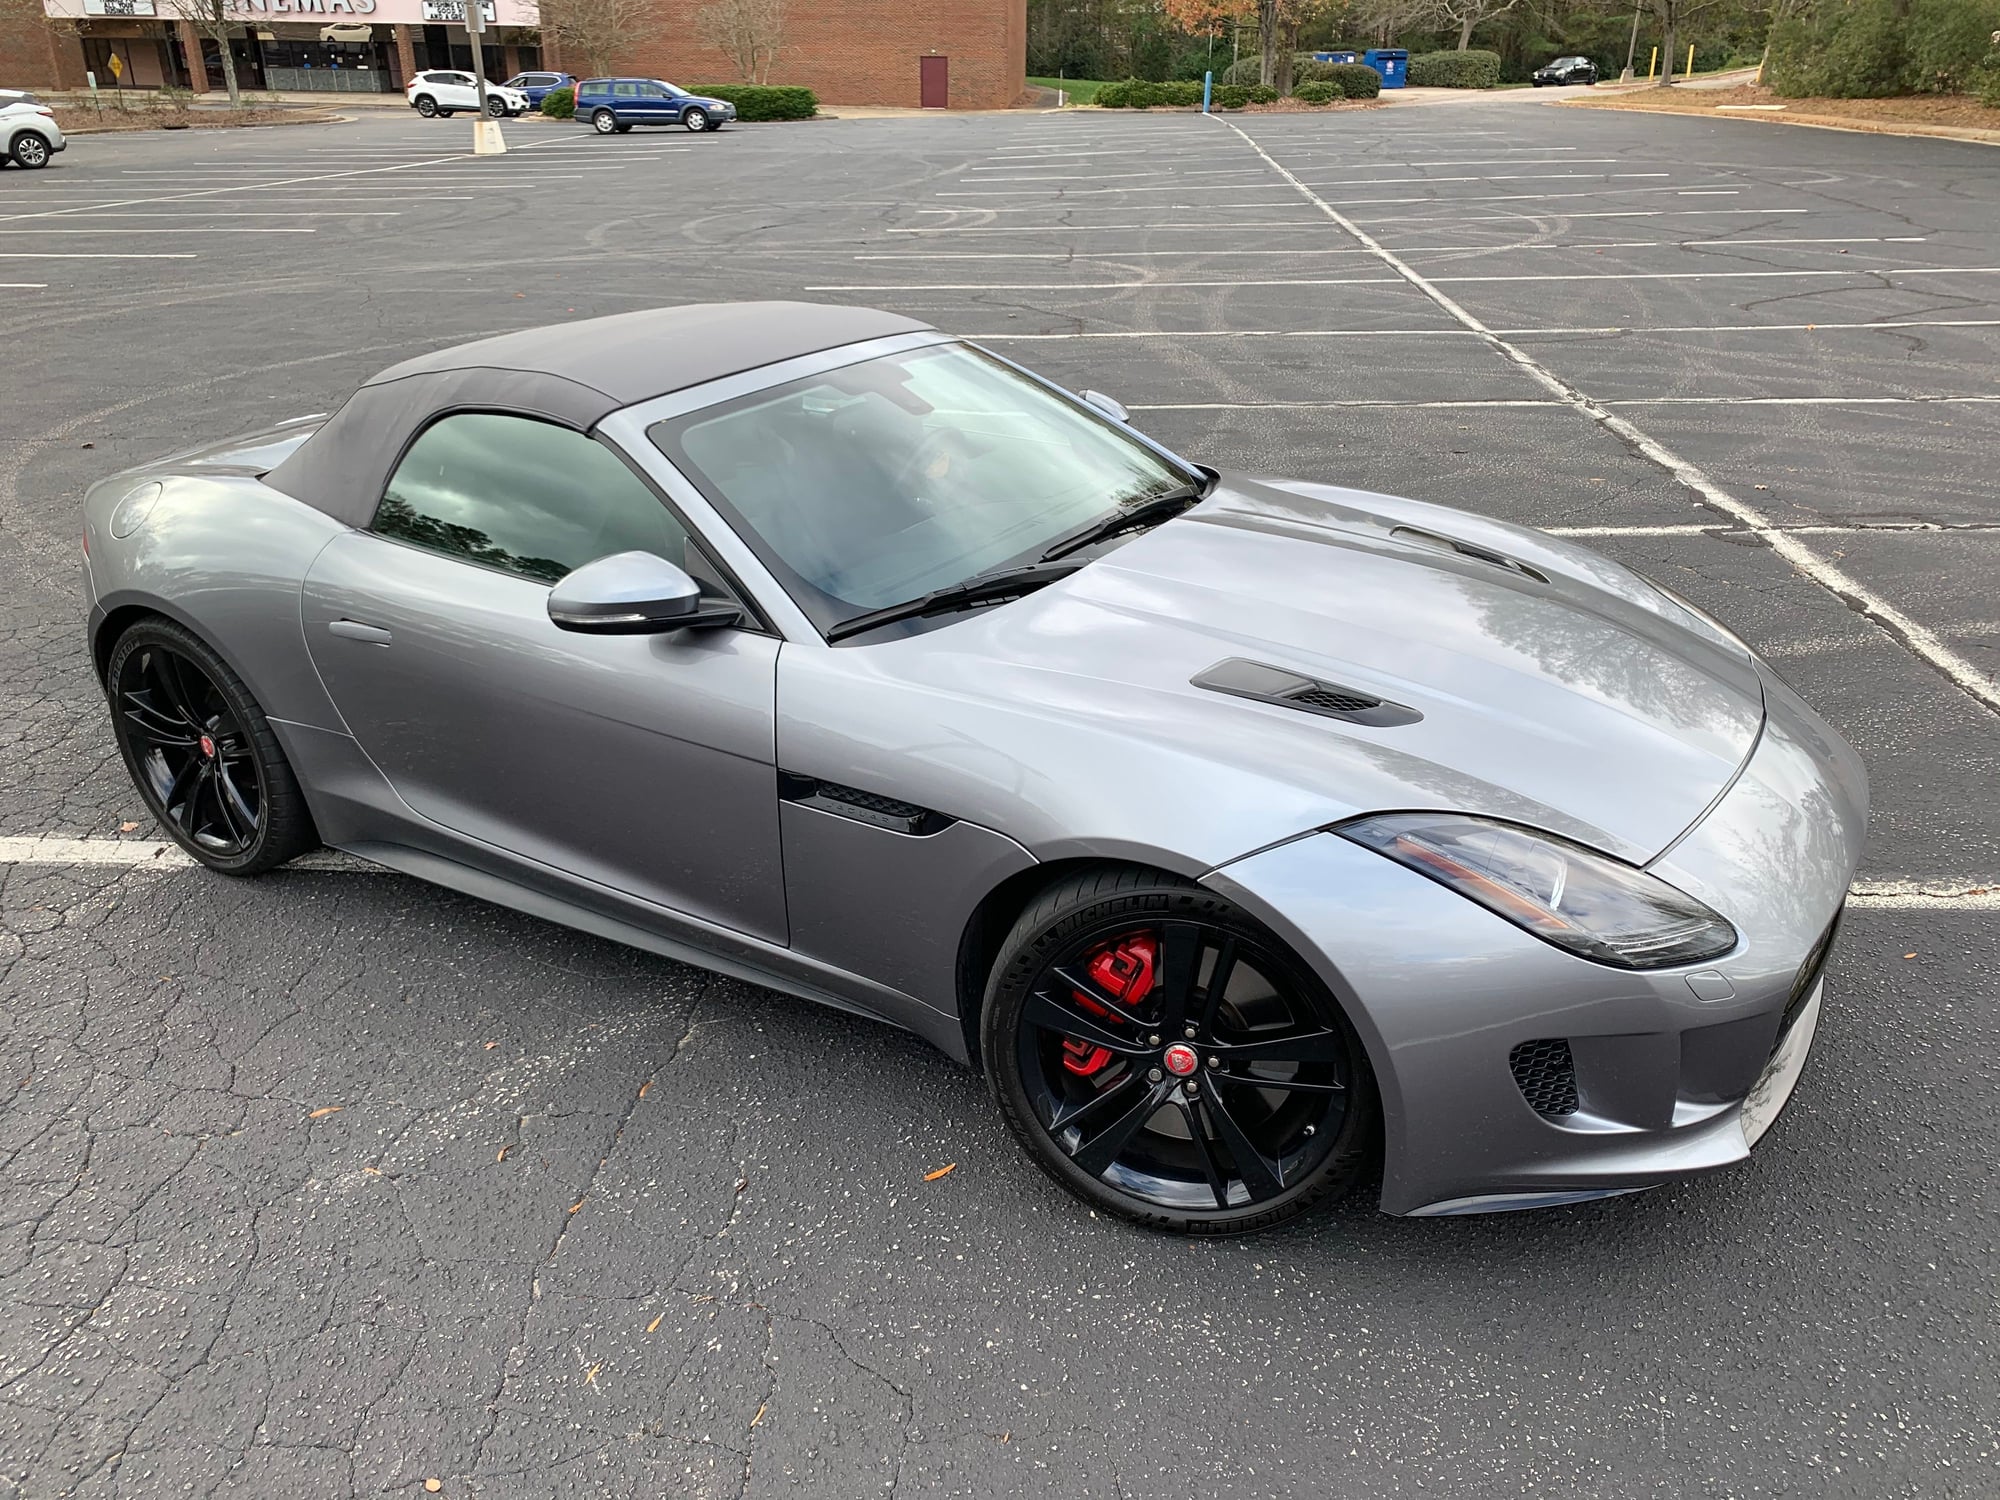 2015 Jaguar F-Type - 2015 F Type V8s 645 HP REDUCED!!! - Used - VIN sajwa6gl6fmk19011 - 32,500 Miles - 8 cyl - 2WD - Automatic - Convertible - Gray - Raleigh, NC 27612, United States